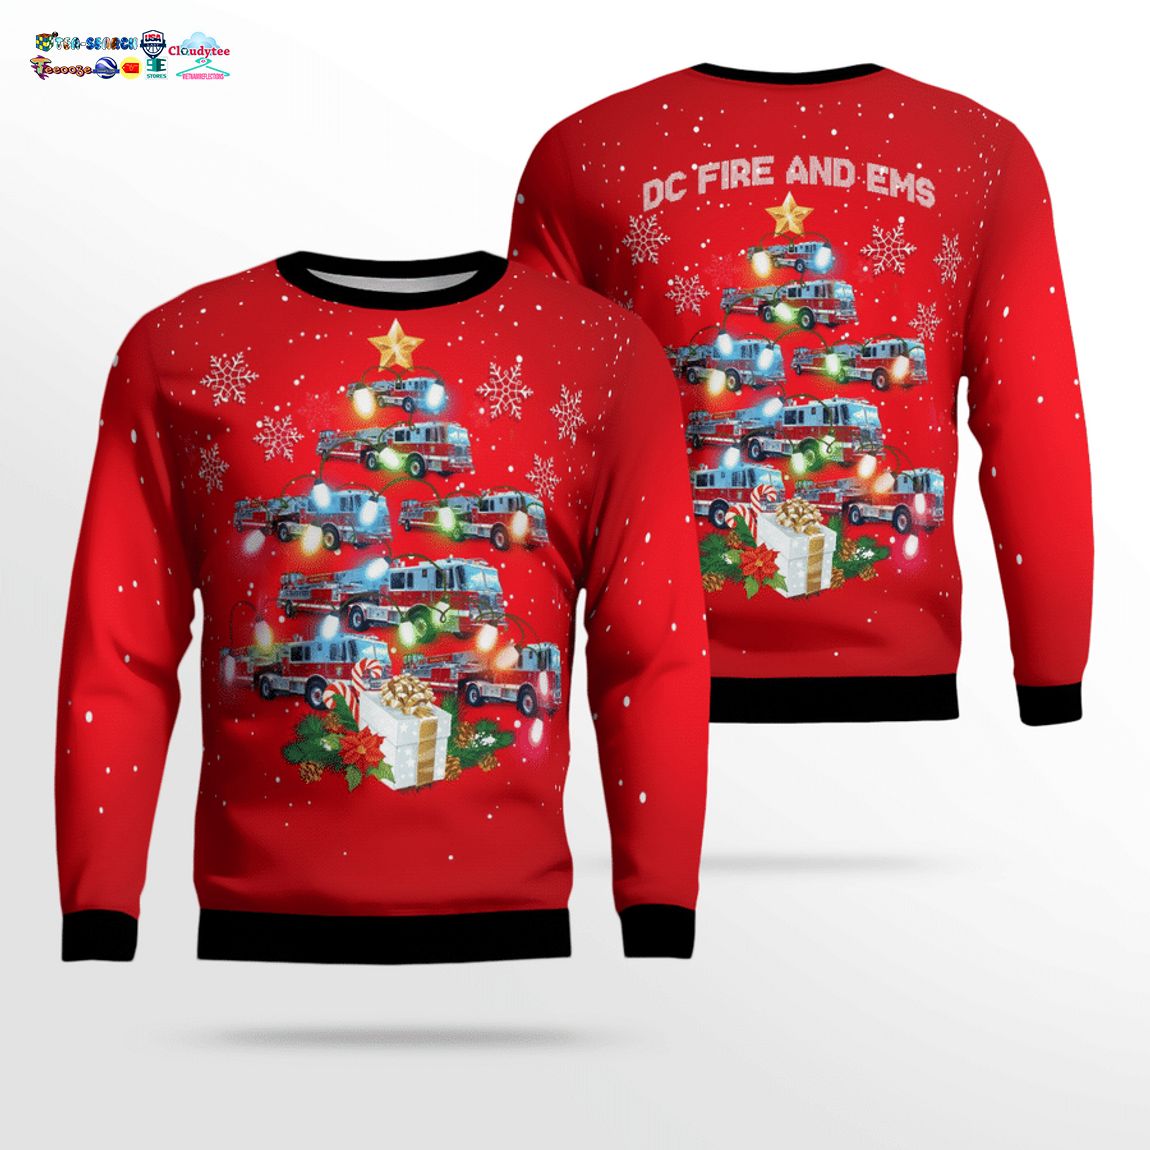 washington-dc-fire-and-ems-department-3d-christmas-sweater-1-lLVOz.jpg